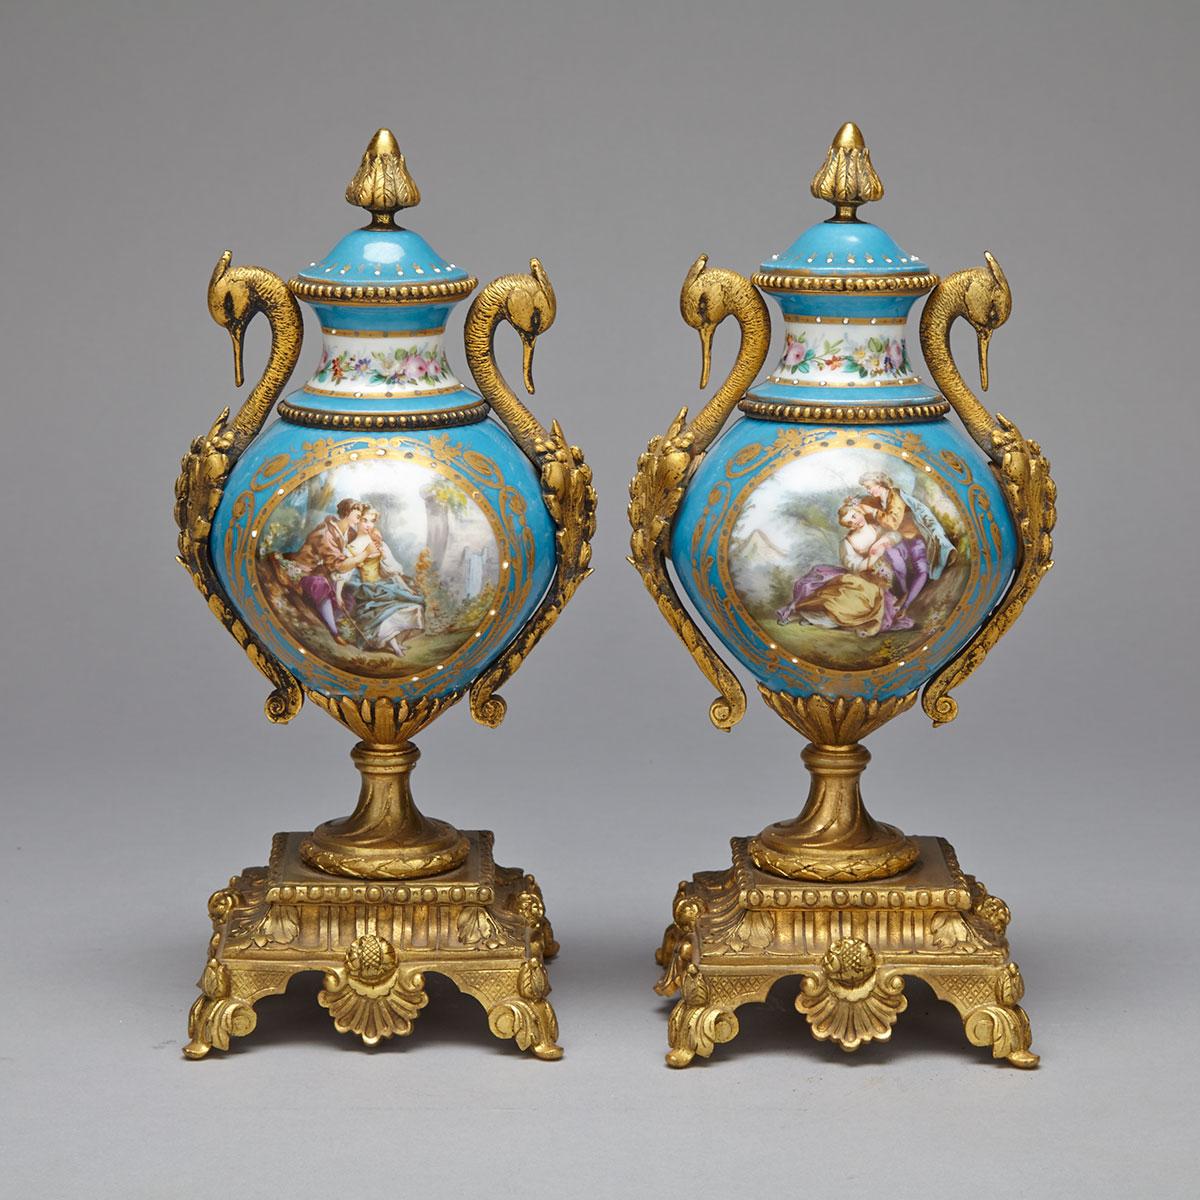 Pair of Sevres Style Porcelain Mounted Covered Urns, c.1860